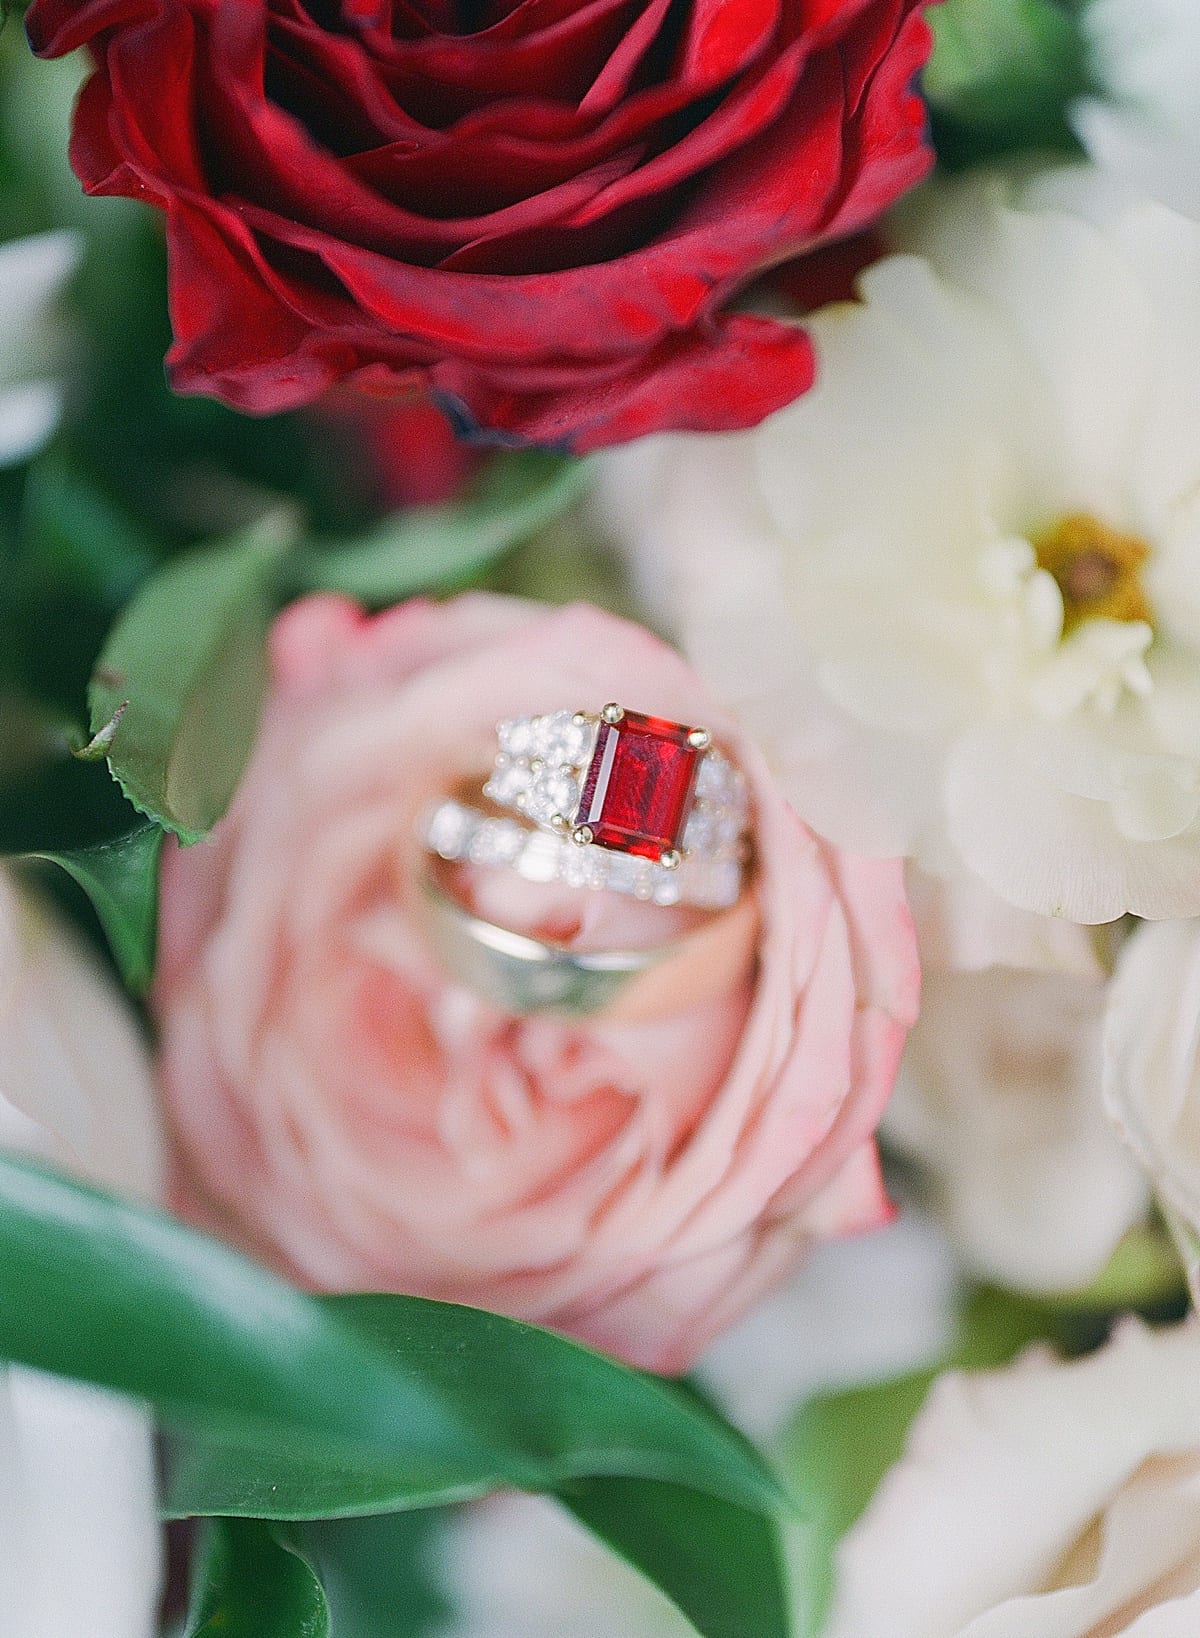 Wedding Rings in Pink Rose Surrounded by Flowers Photo